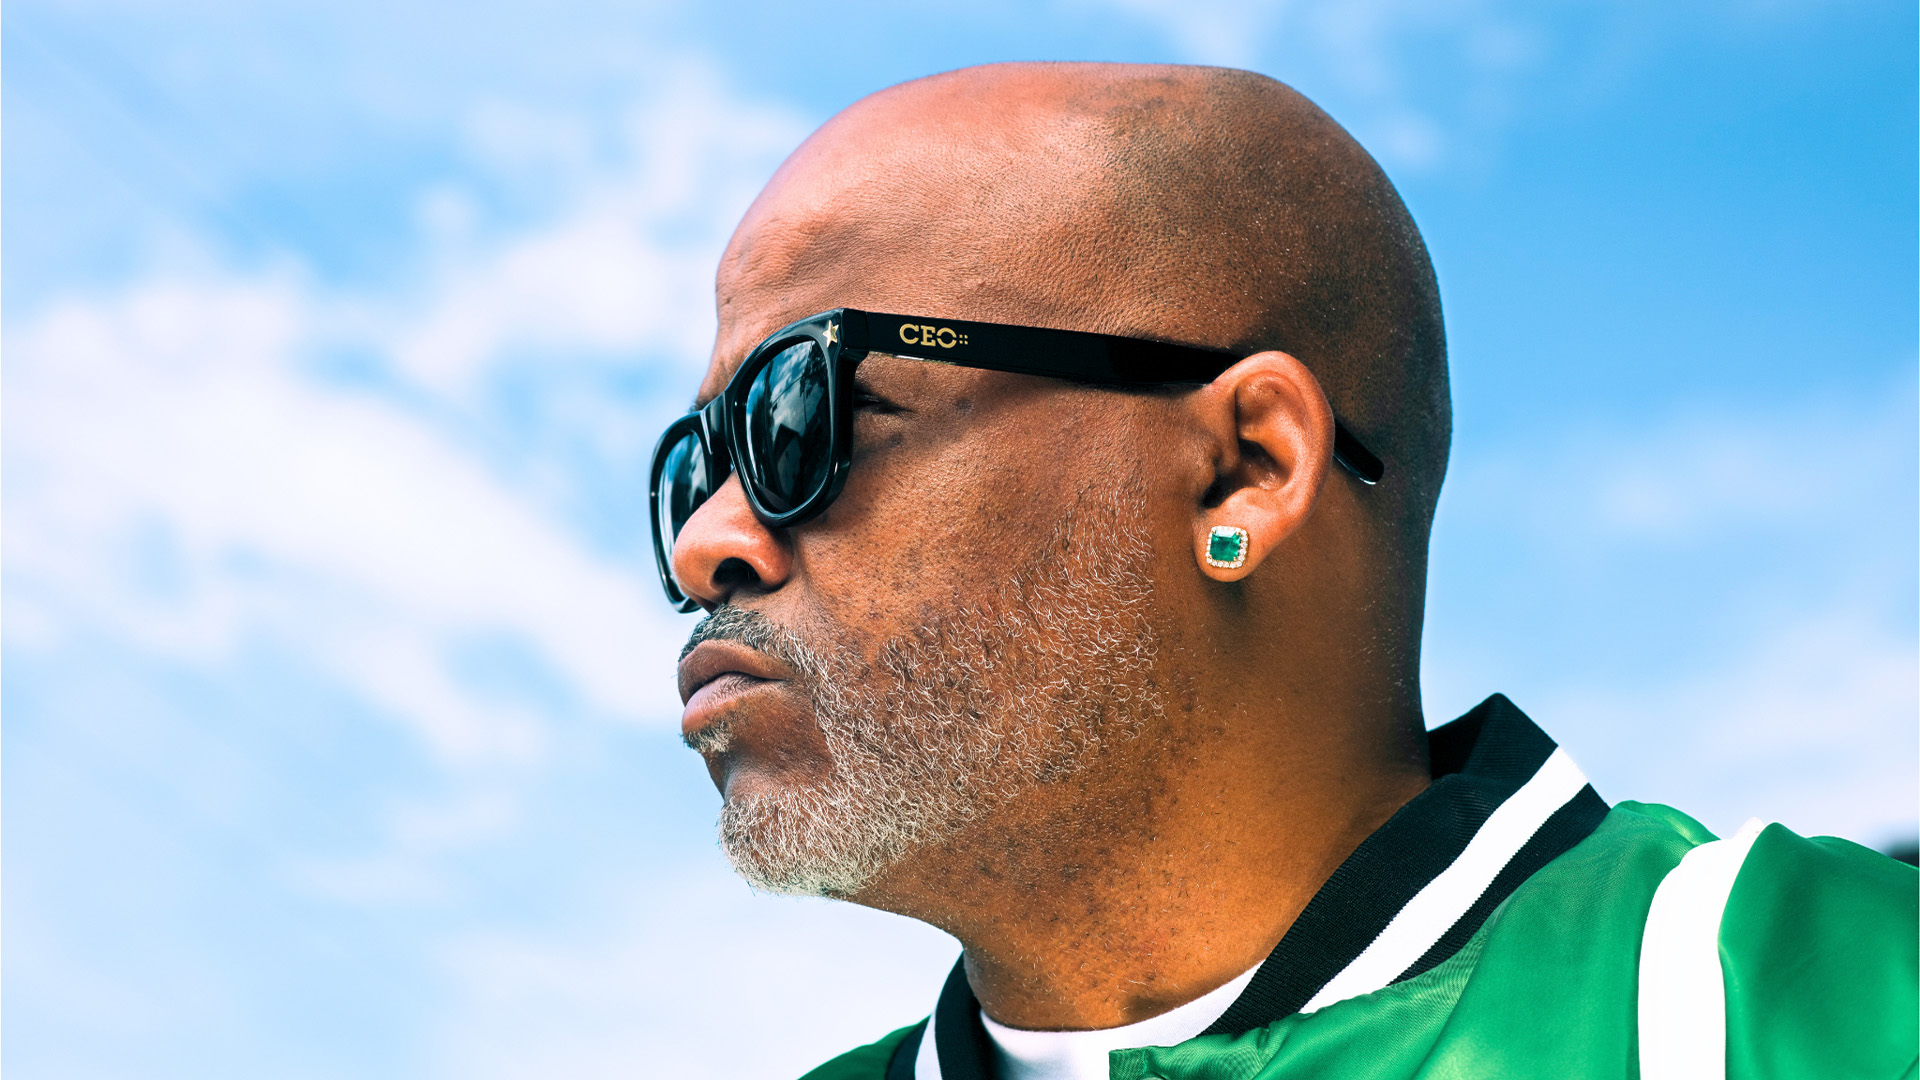 Dame Dash Says Having 'Boss Vision' Is A Requirement For His New Collaboration With Black-Owned Eyewear Brand CEV Collection